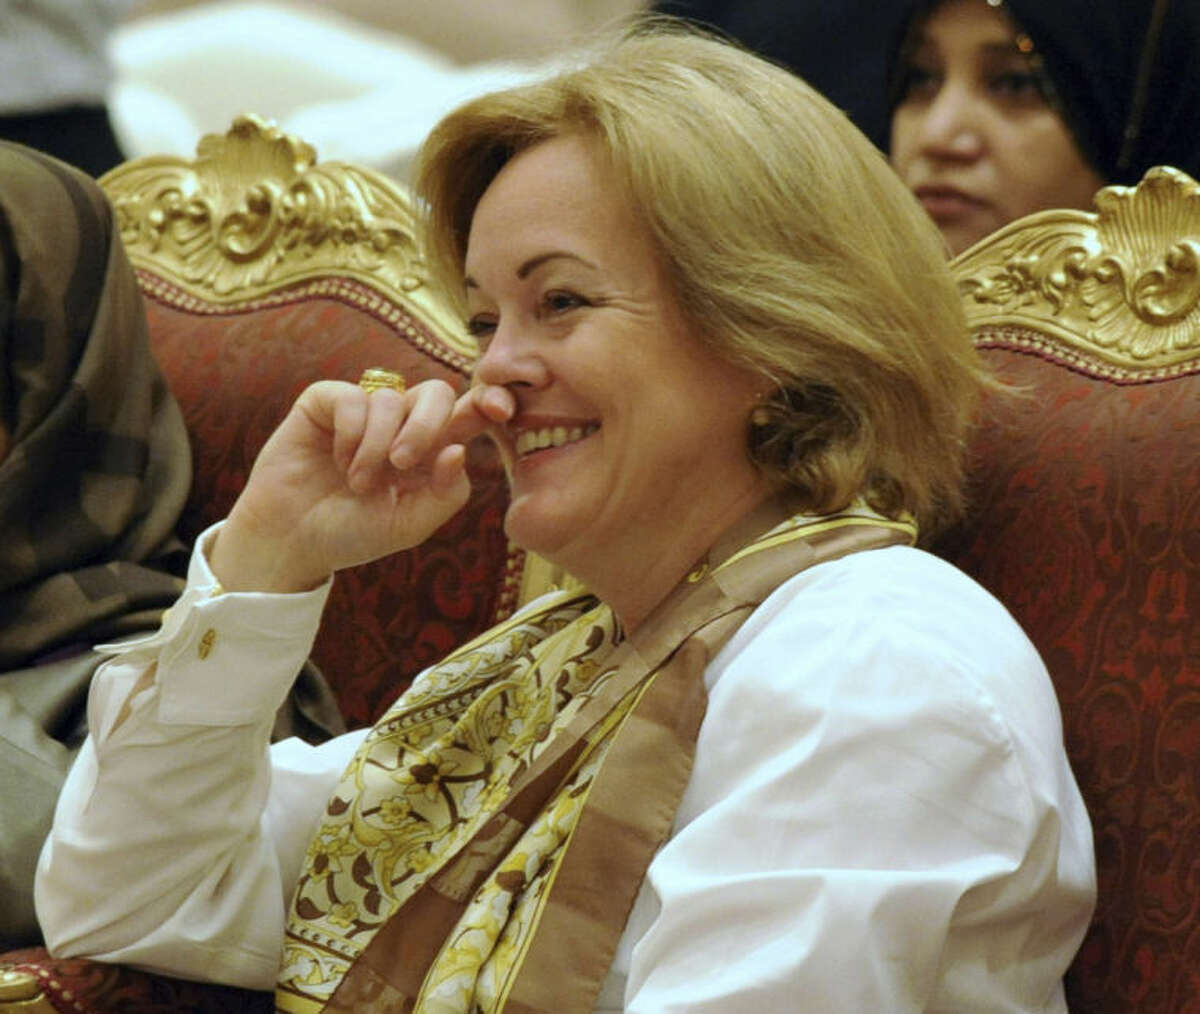 FILE - In this March 8, 2010 file photo, US Ambassador to Kuwait Deborah Jones is seen in Kuwait City. On Saturday, July 26, 2014,The United States shut down its embassy in Libya and evacuated its diplomats to neighboring Tunisia under U.S. military escort amid a significant deterioration in security in Tripoli as fighting intensified between rival militias, the State Department said. On Sunday, July 20, 2014, U.S. Ambassador to Libya Deborah Jones tweeted about ?“heavy shelling and other exchanges?” of fire in the vicinity of the embassy. (AP Photo/Gustavo Ferrari, File)